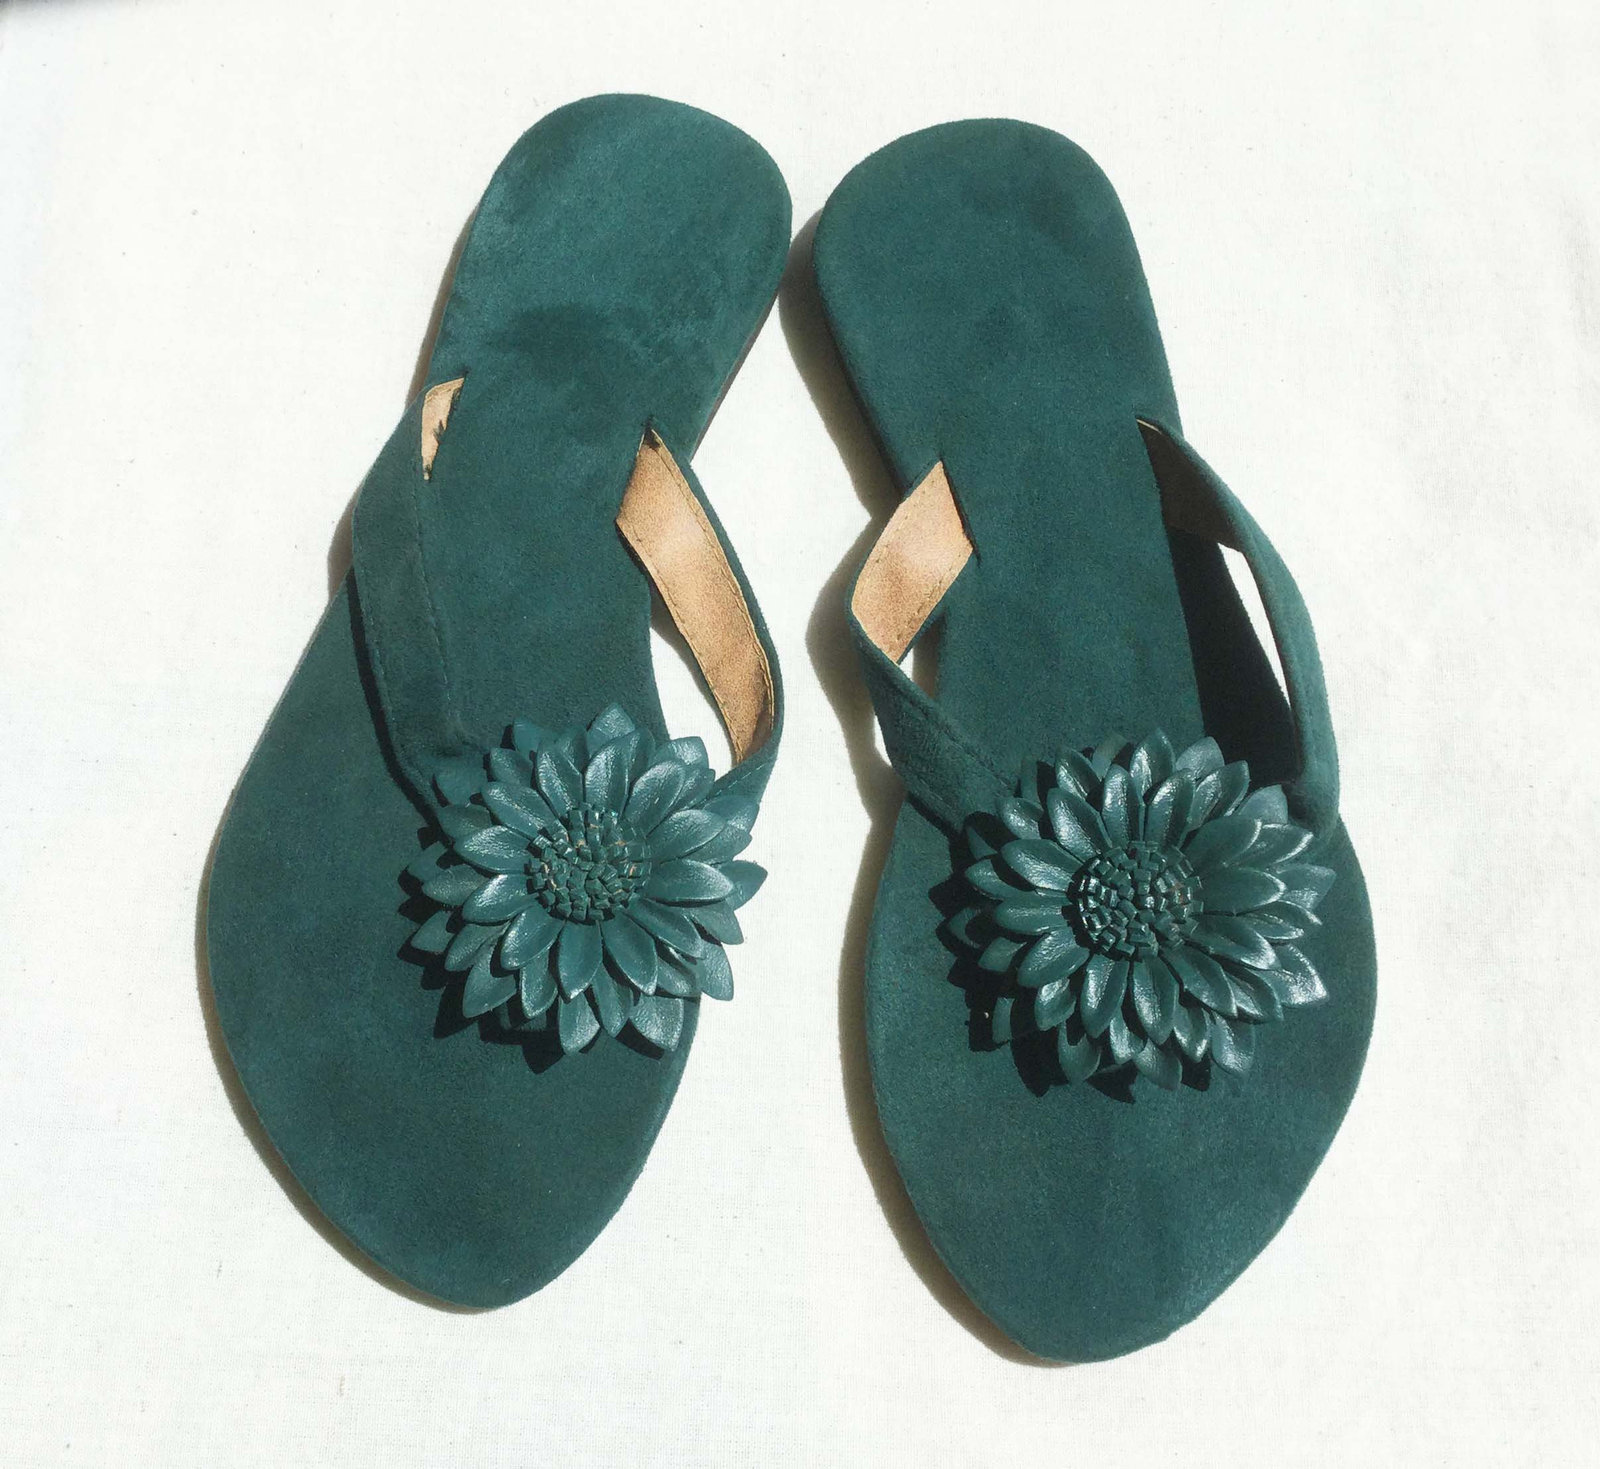 Suede flip flop Sandals  made In Bali  green color and 